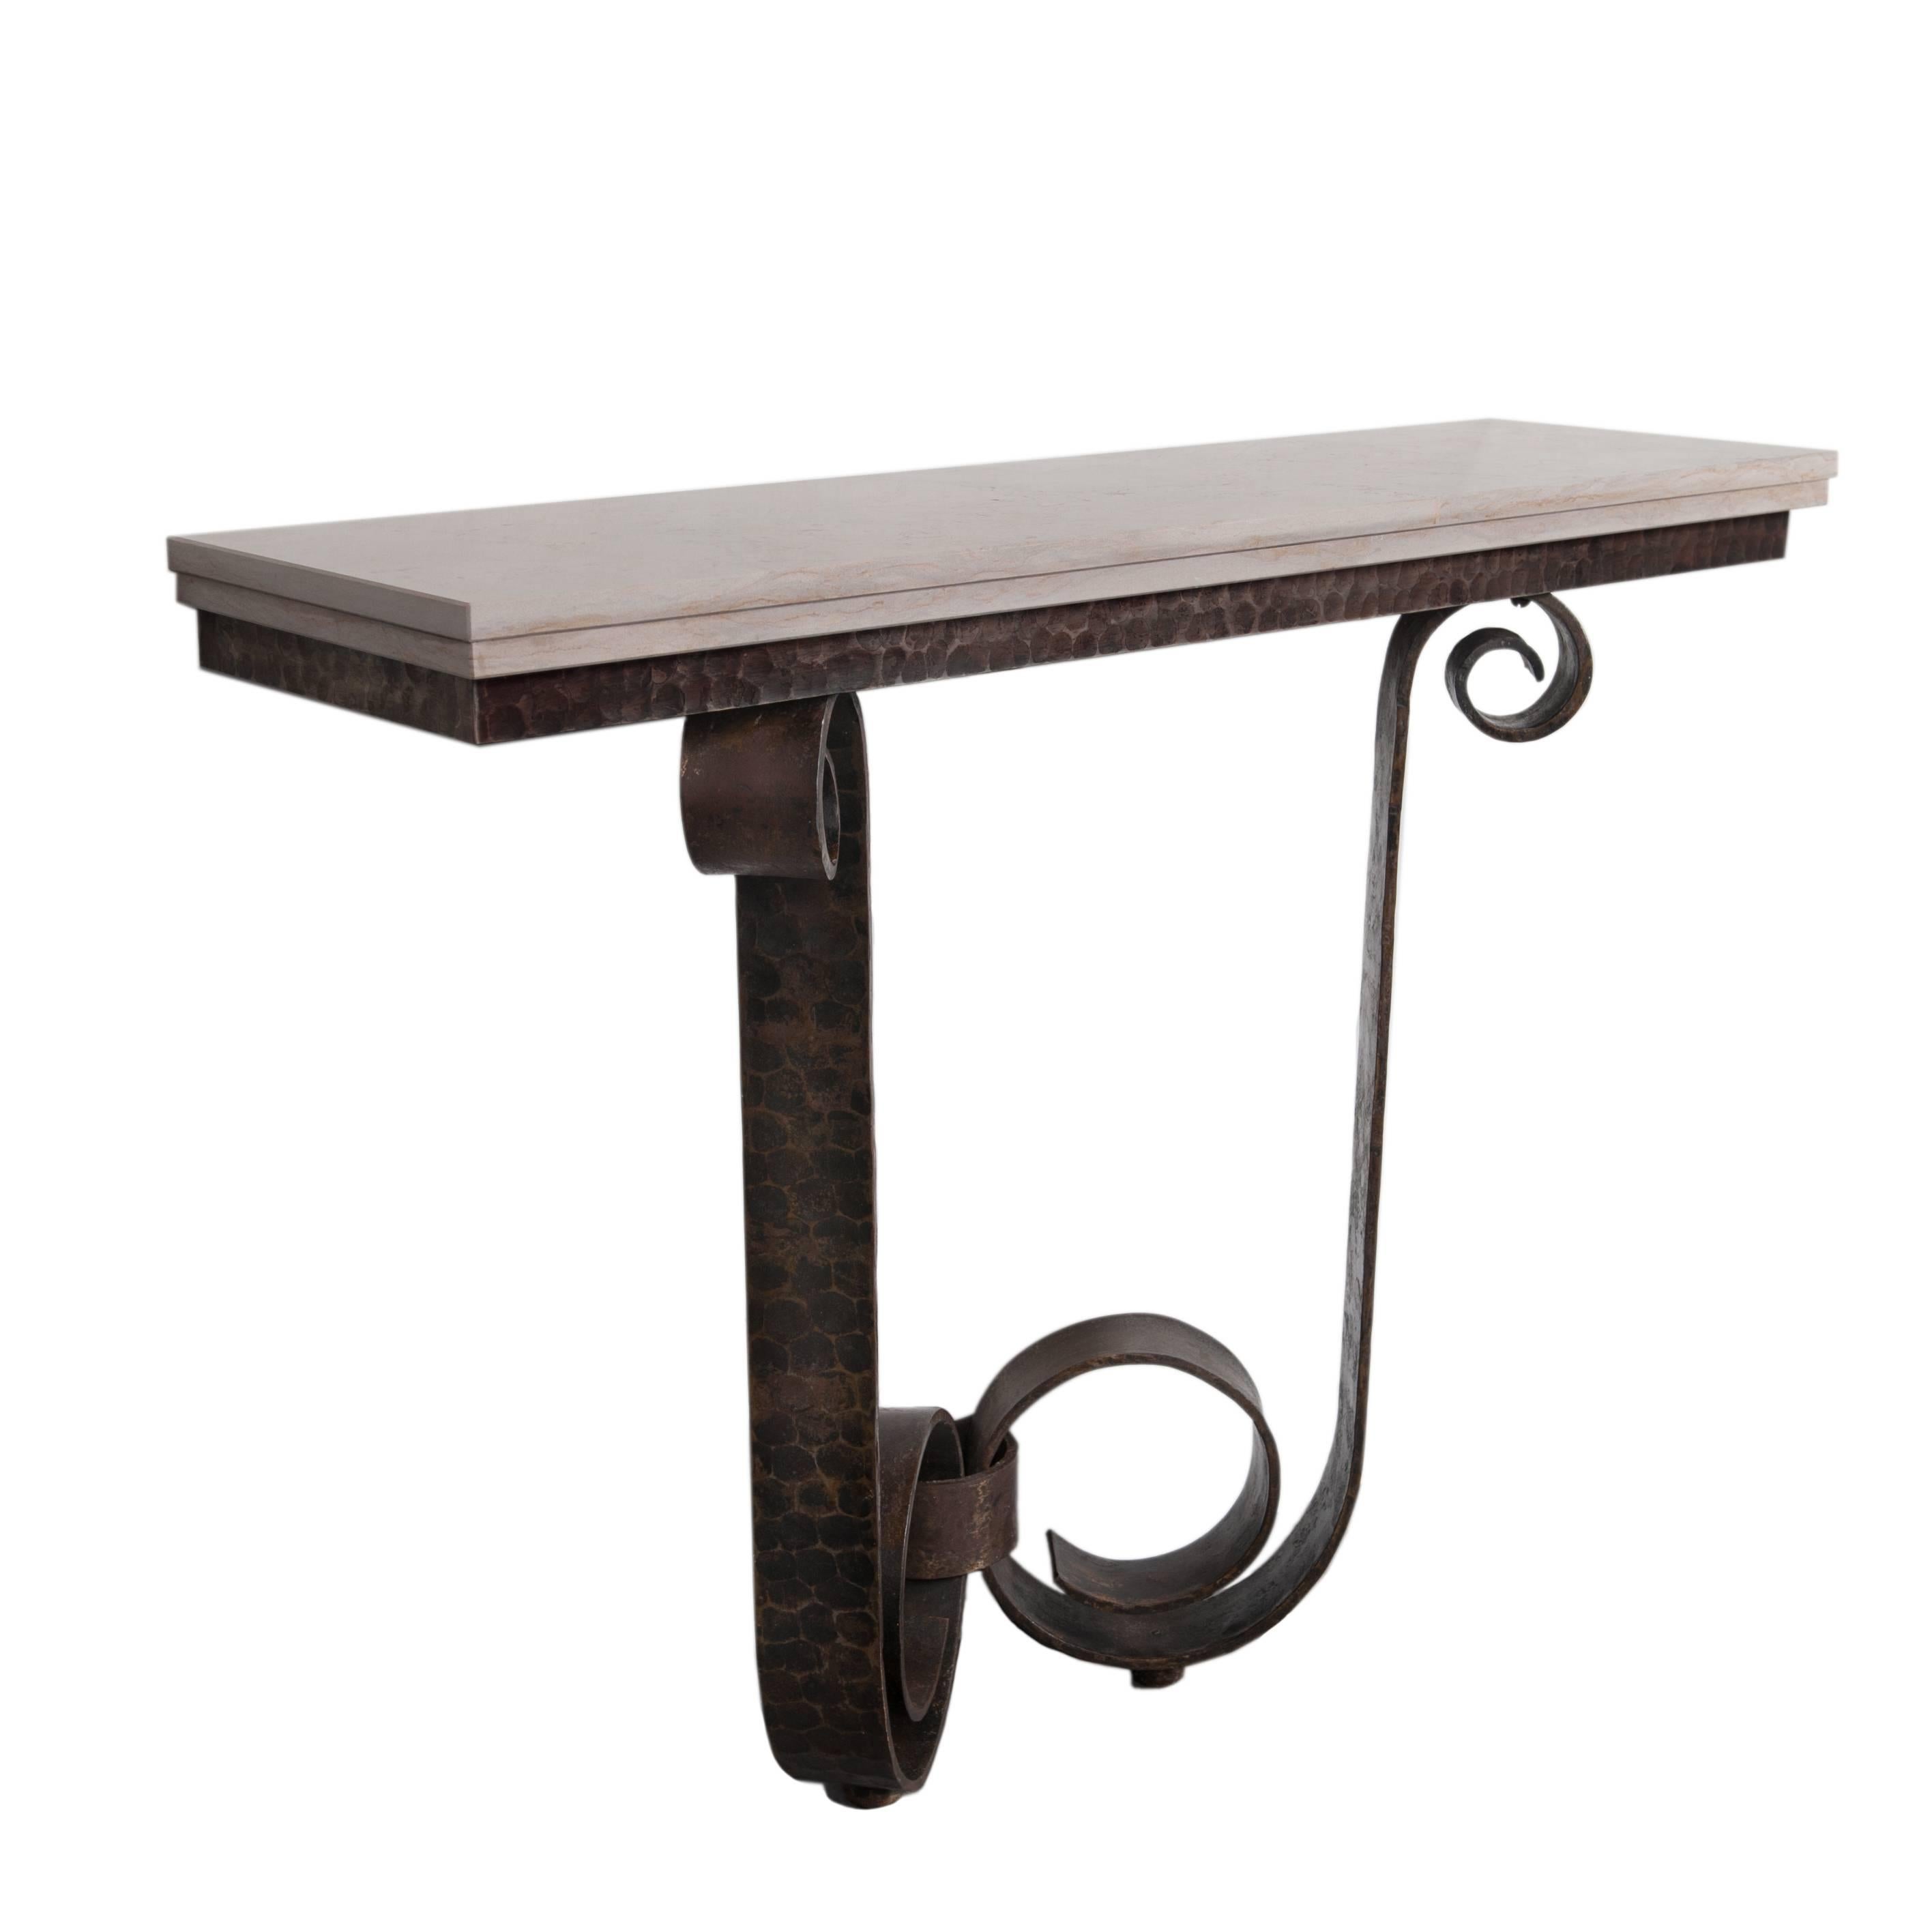 Impressive iron Art Deco console table with hammered surface.

The console table displays an extraordinary impressive look, because of its hand-forged, hammered surface and the doubled marble top.
The rusty brown-grey color of the waxed iron base